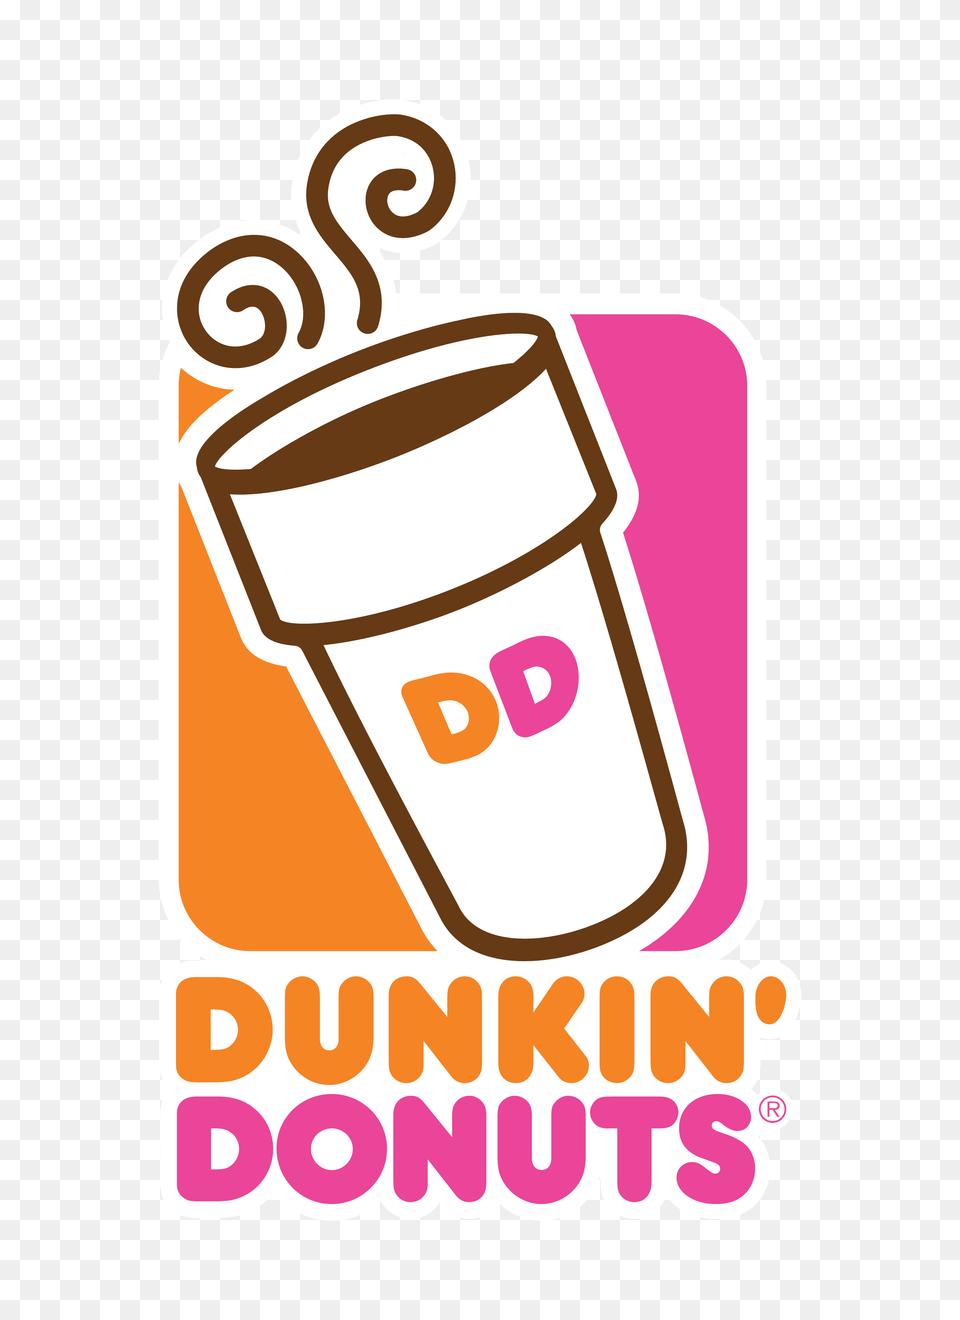 Dunkin Donuts Clipart Candy Floss Machine, Dynamite, Weapon Png Image